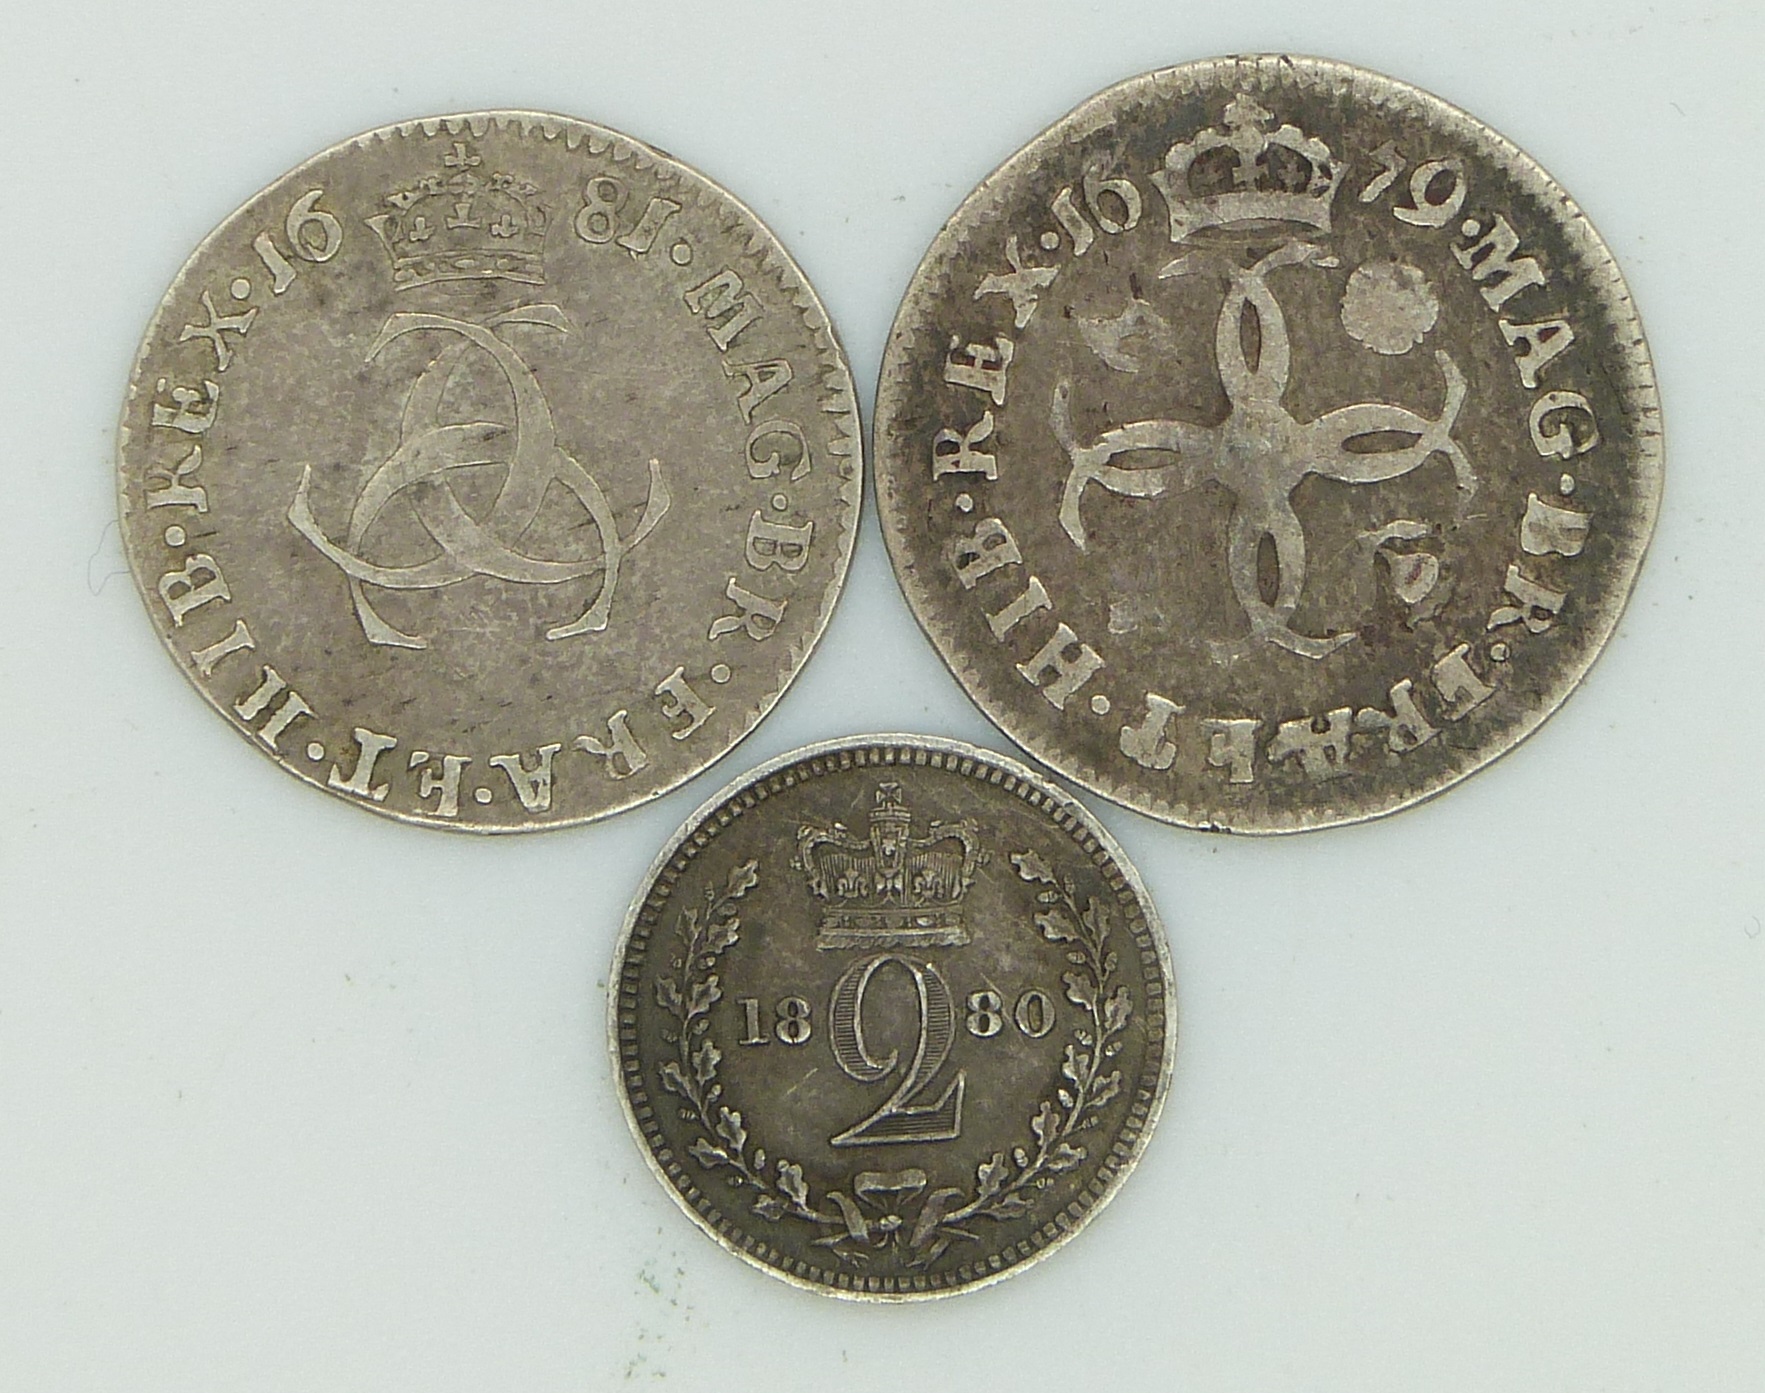 1679 Charles II Maundy fourpence together with a 1681 Maundy threepence and an 1880 Queen Victoria